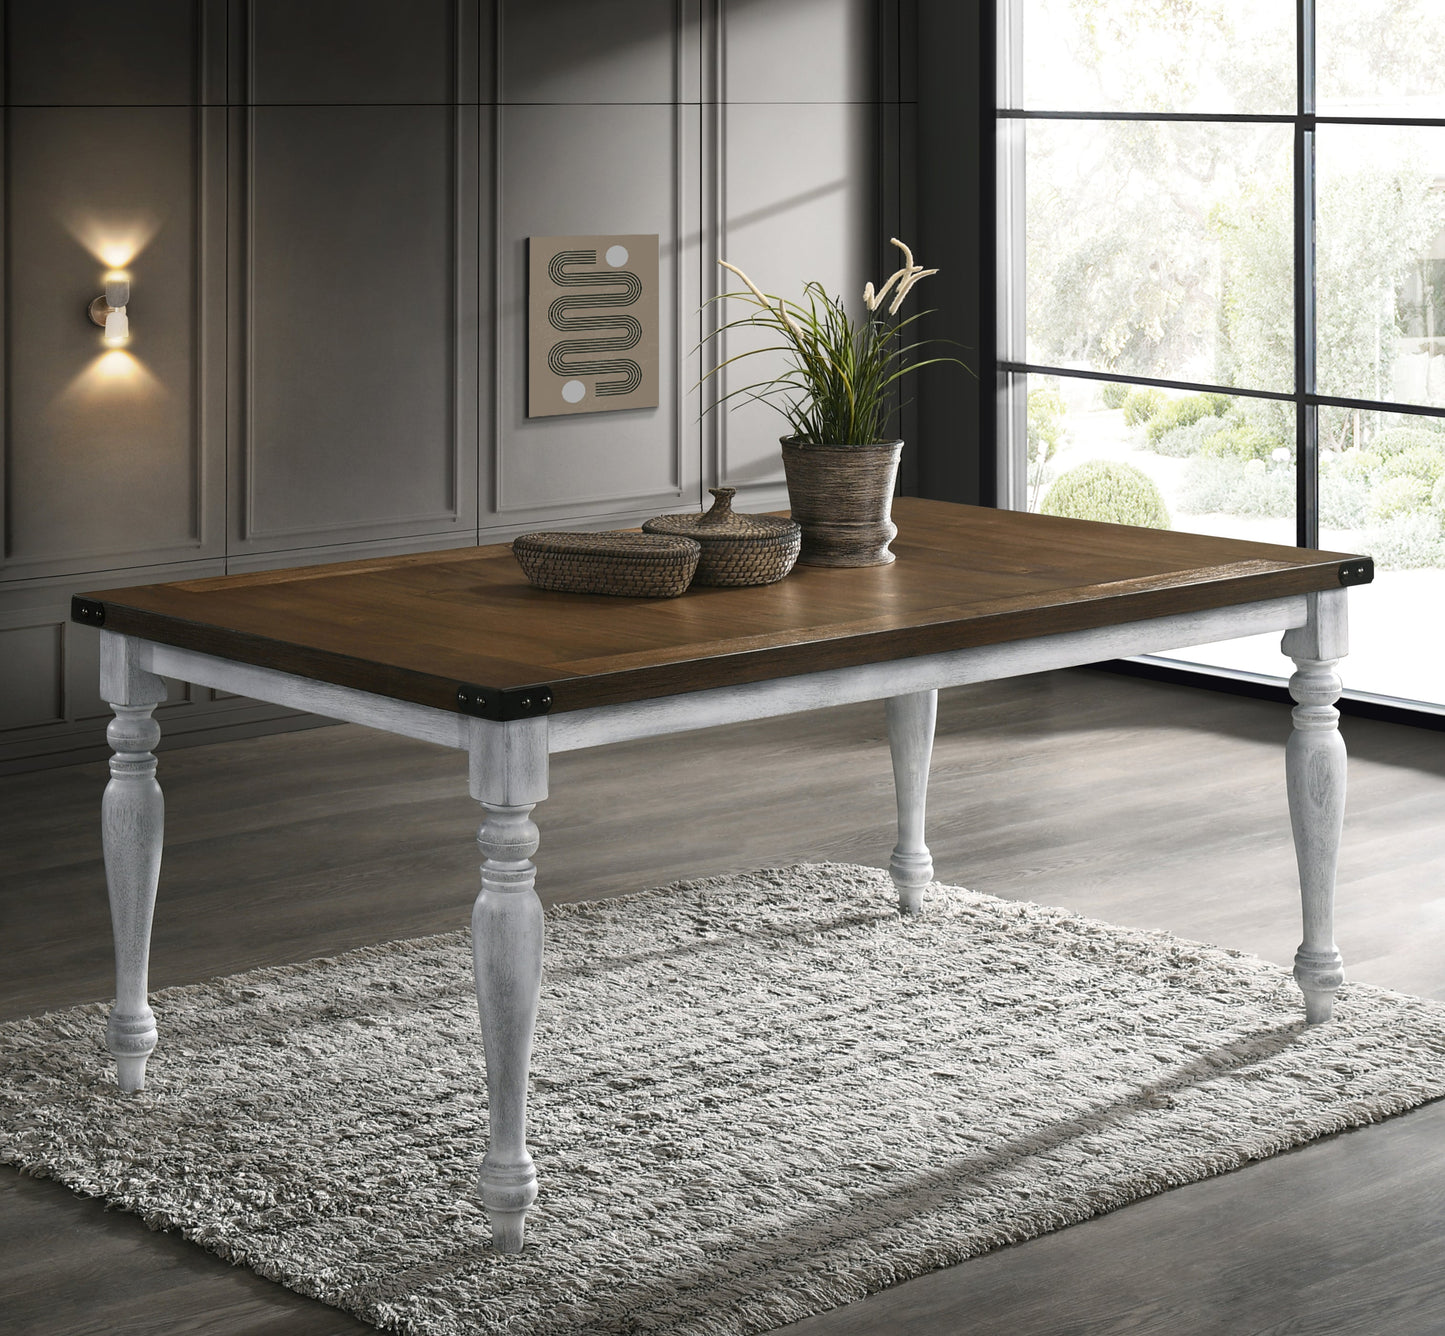 Salines Two-tone Wood Turned Leg Dining Table, Rustic White and Oak